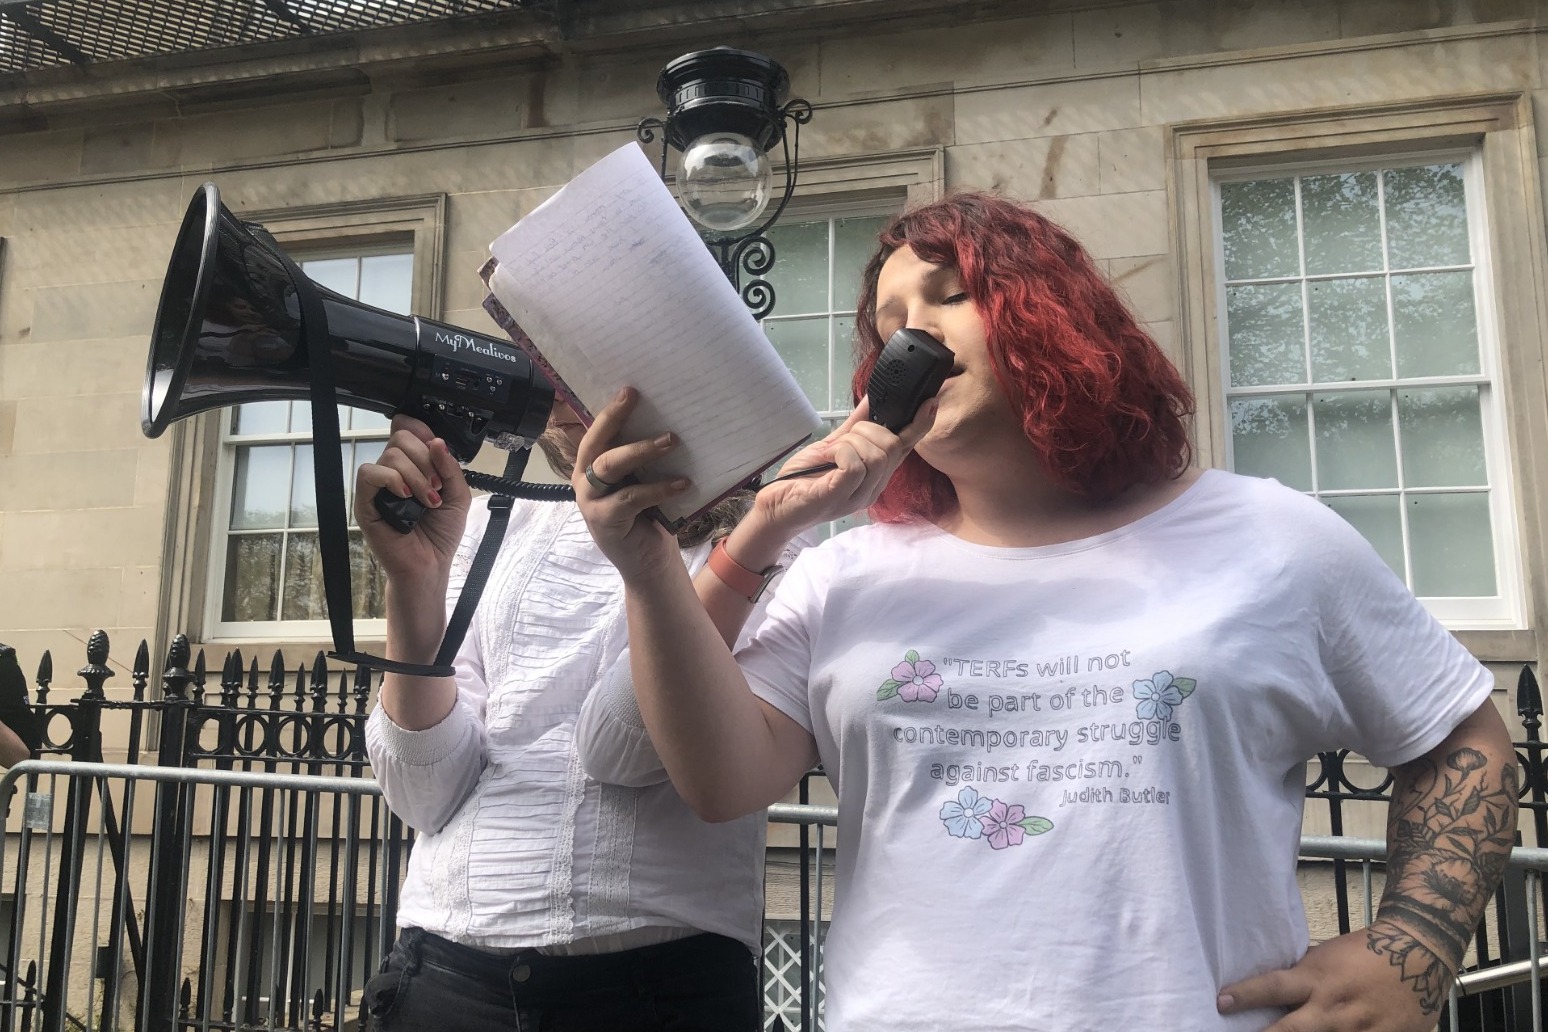 ‘Solidarity with US siblings’ – Activists gather in Edinburgh over Roe vs Wade 